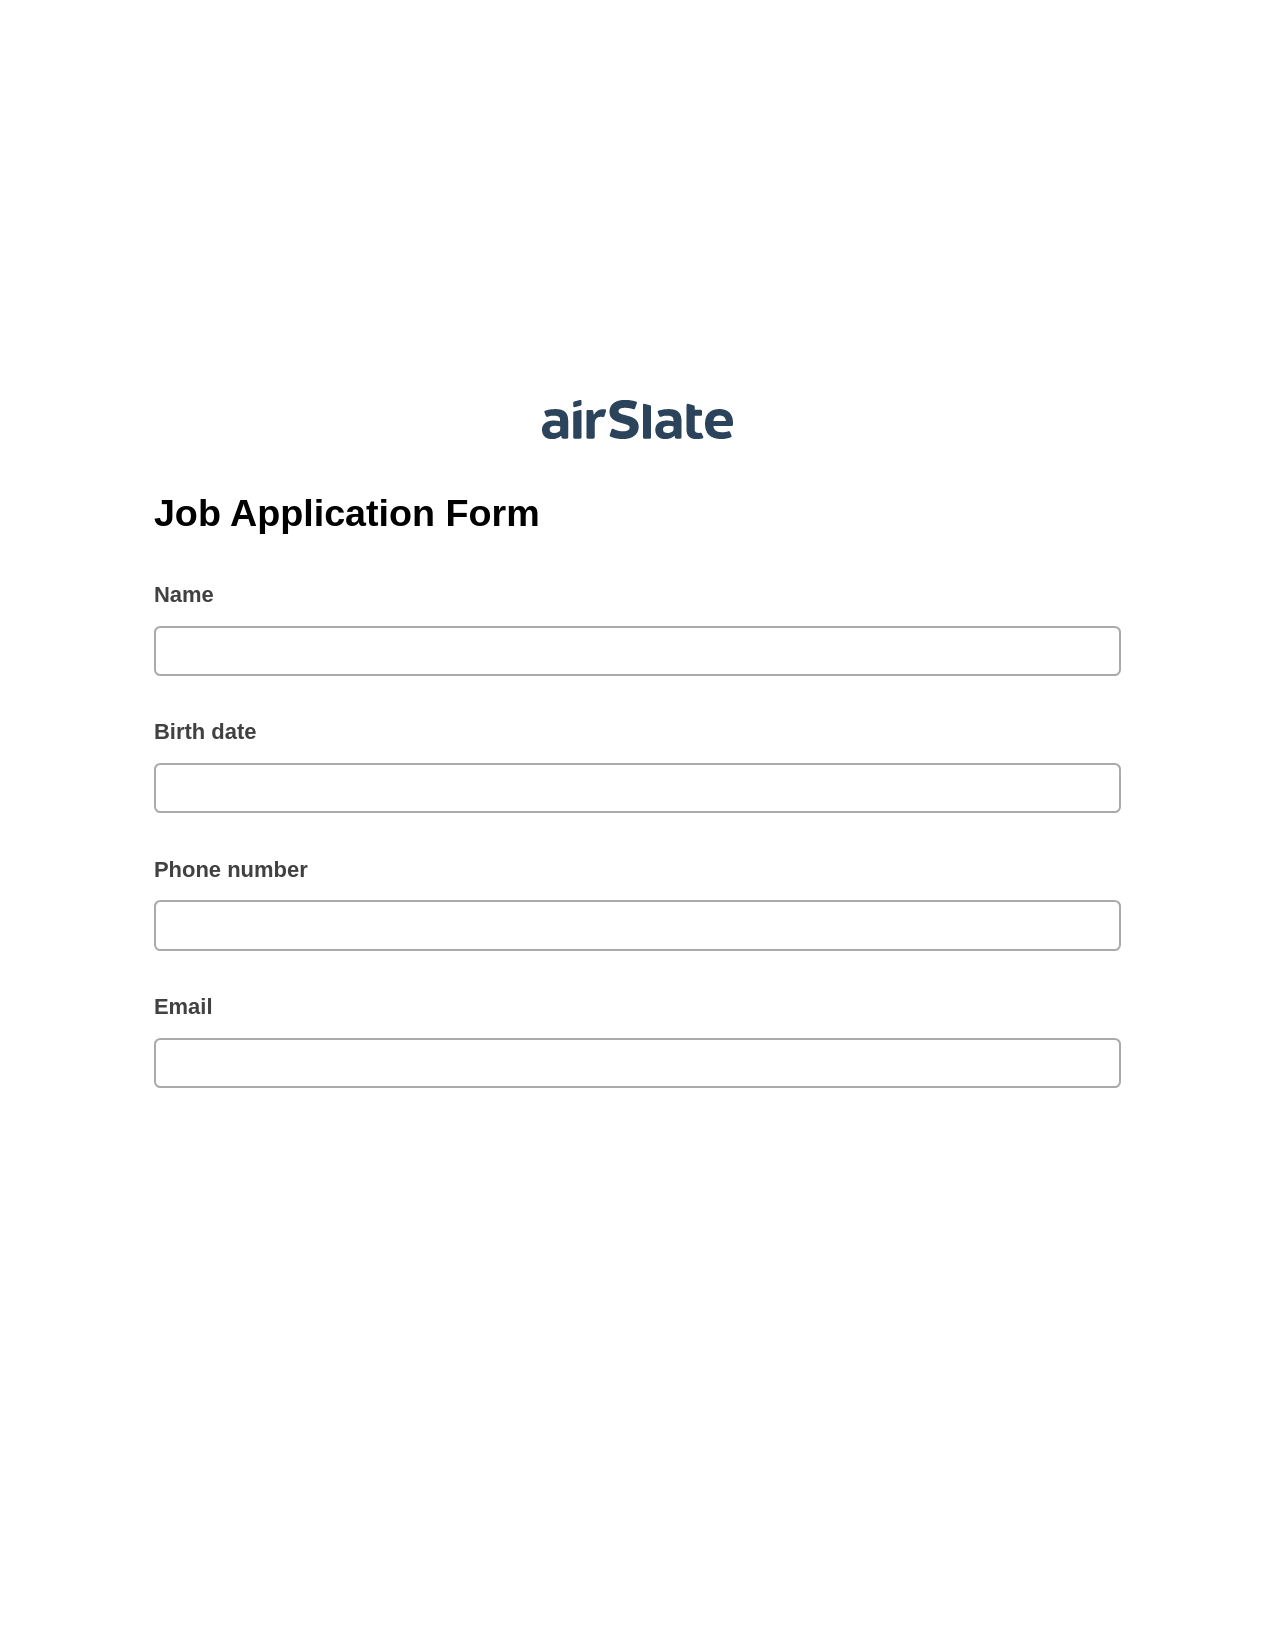 Multirole Job Application Form Pre-fill Dropdown from Airtable, Webhook Bot, OneDrive Bot